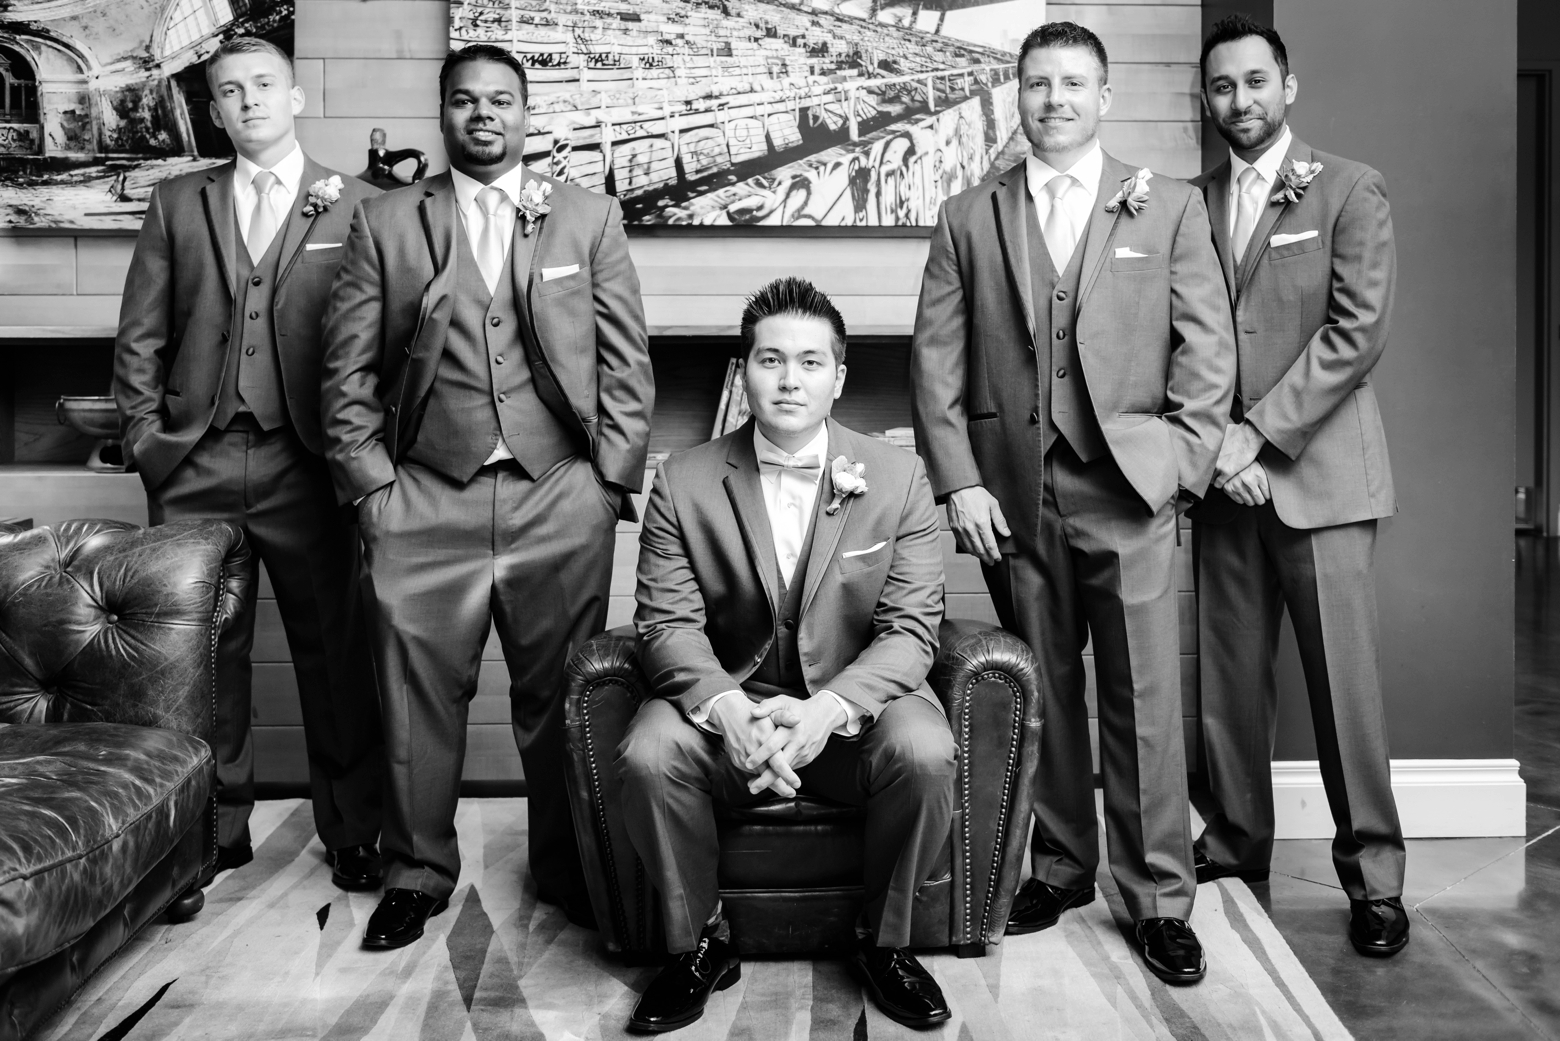 The Groom and his Groomsmen pose in the lobby of the Epicurean Hotel in South Tampa